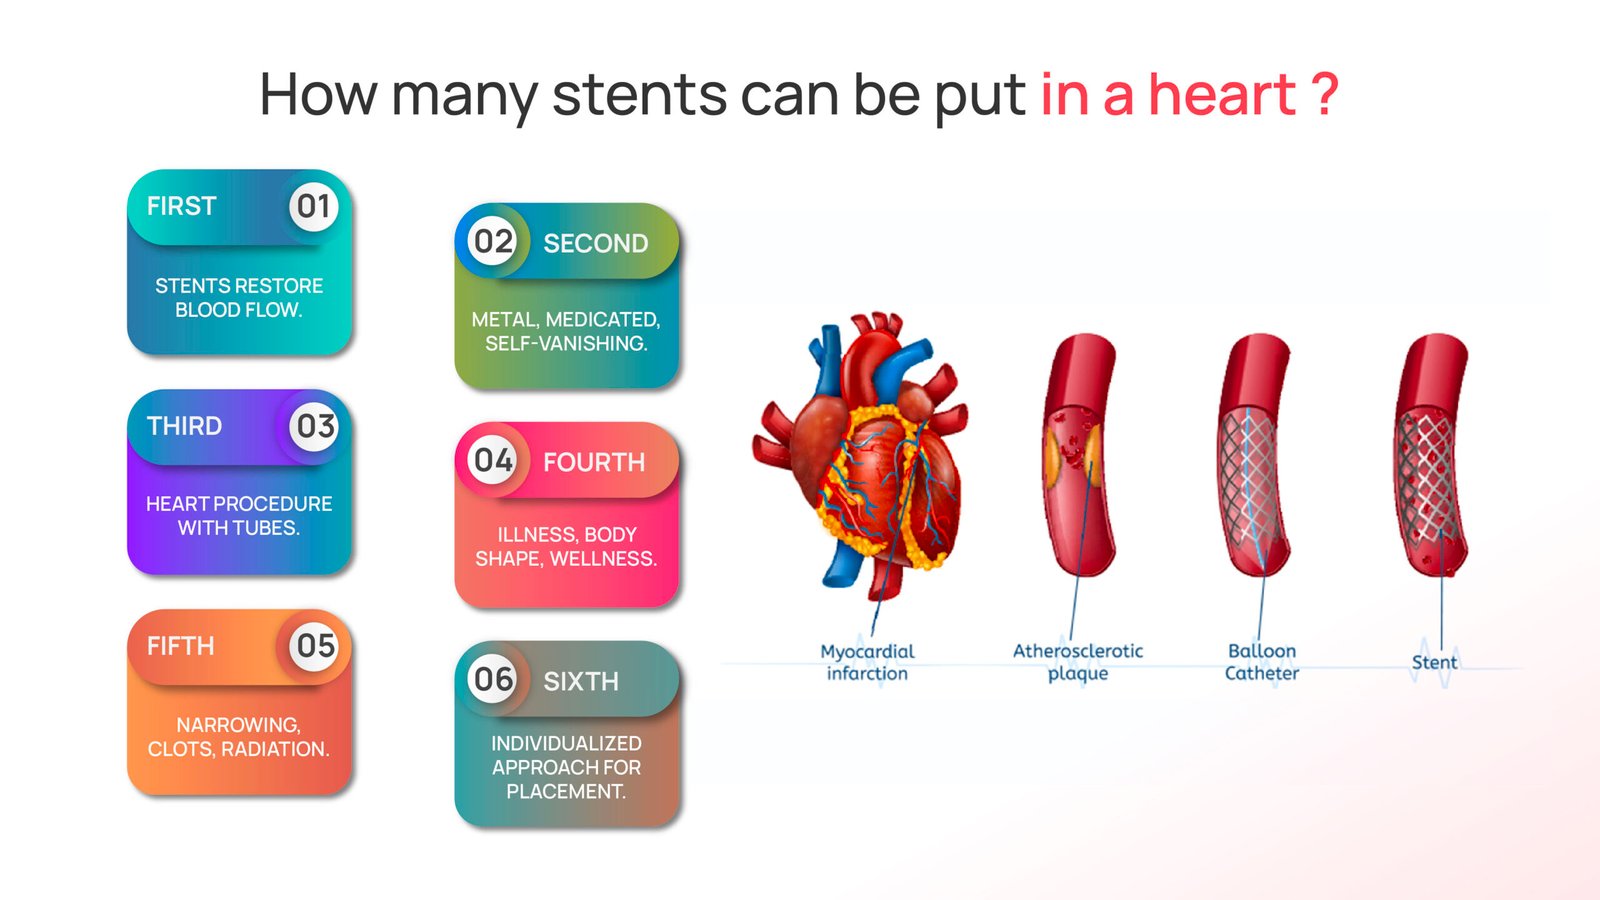 how many stents can be put in a heart